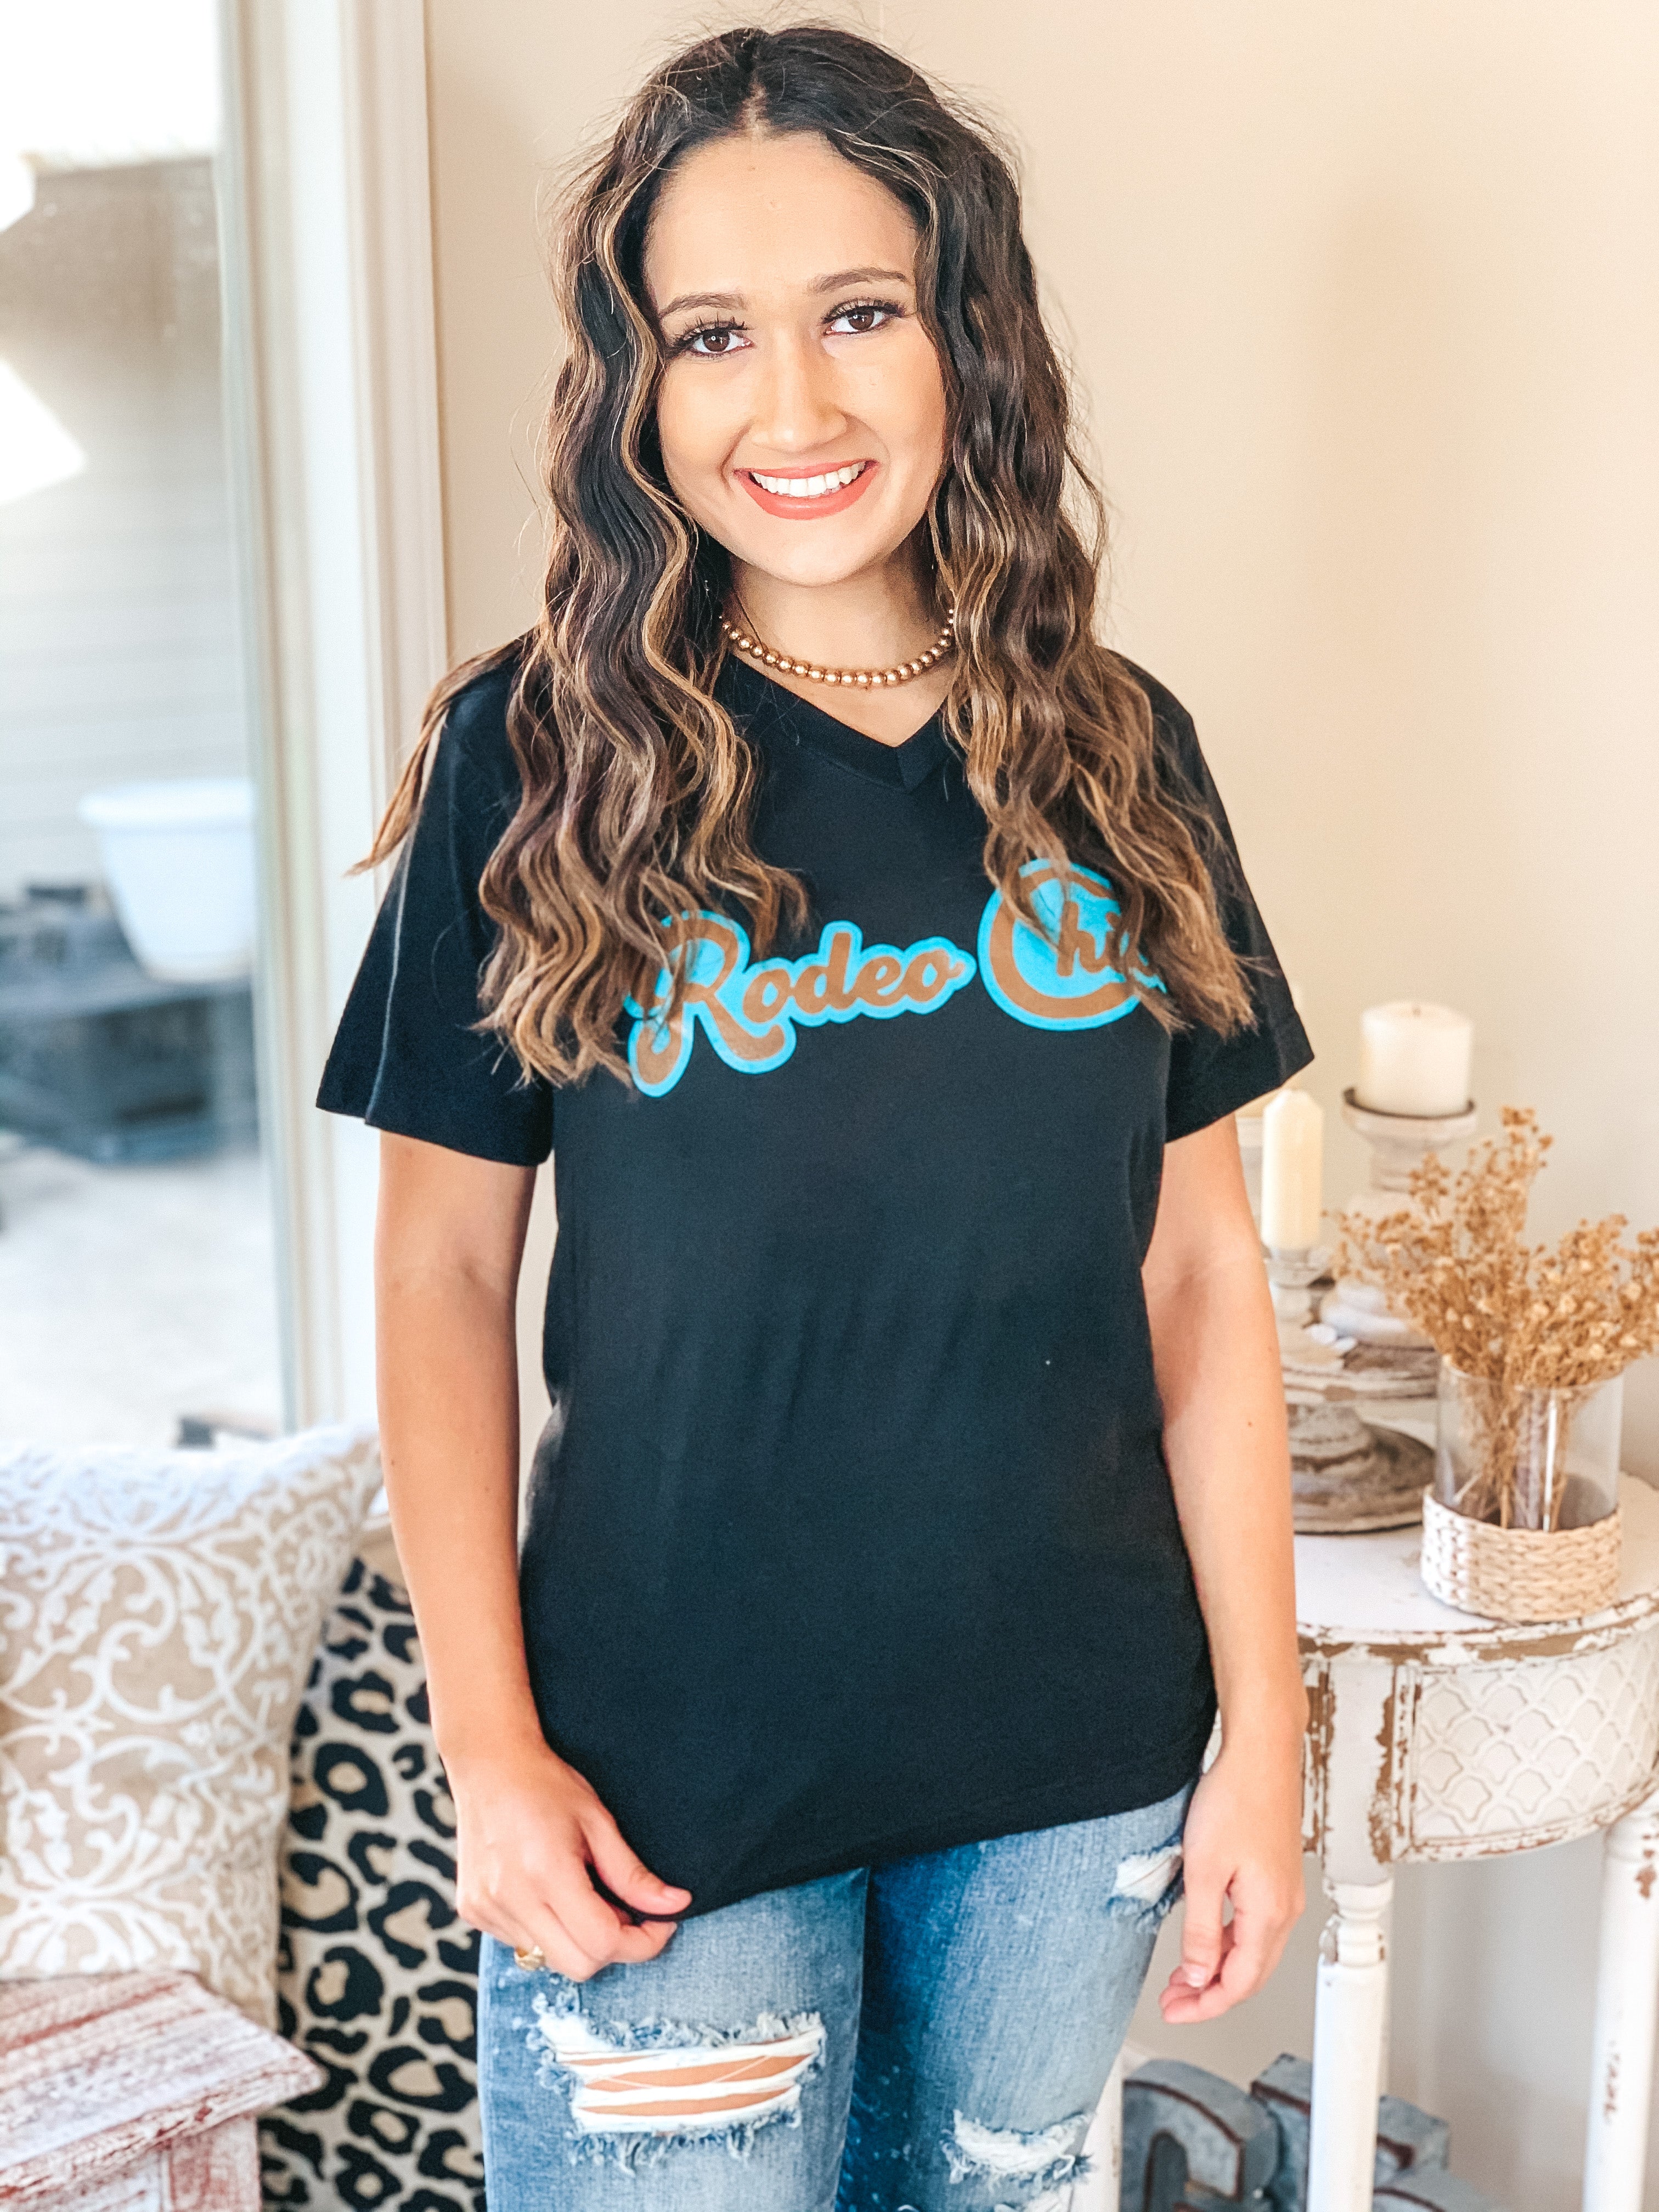 Rodeo Chica Vintage V Neck Graphic Tee in Black - Giddy Up Glamour Boutique